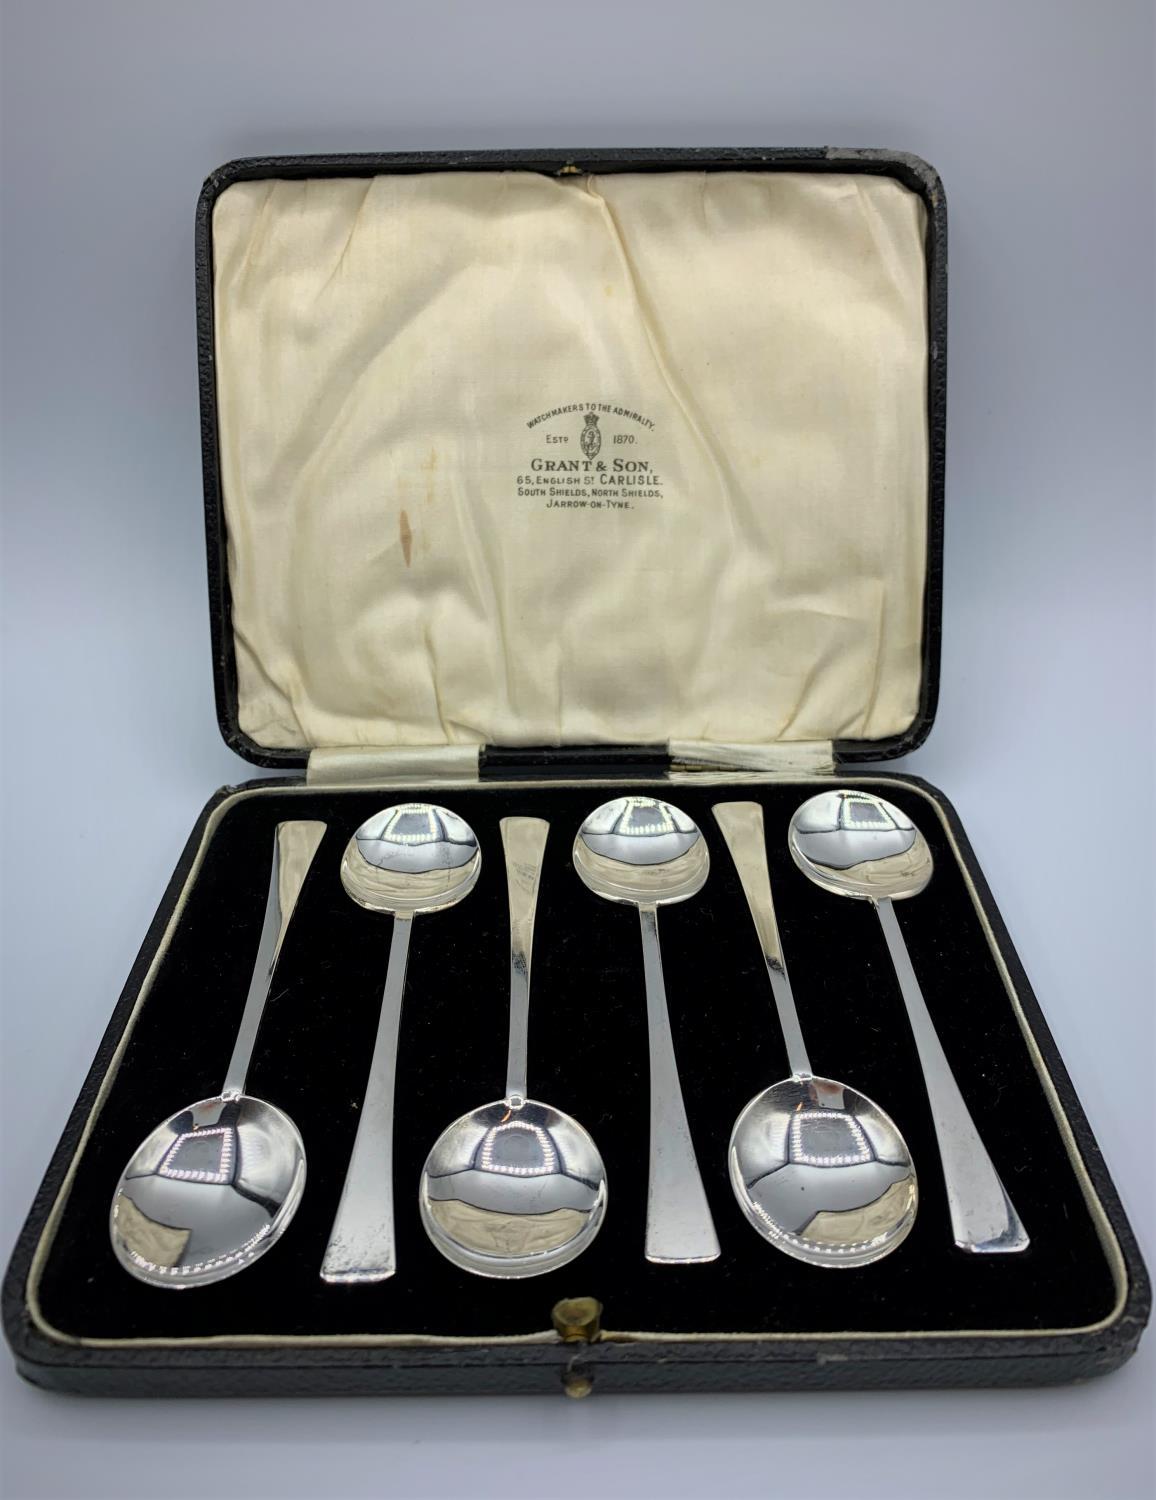 Vintage set of 6 Silver Art Deco Coffee Spoons. Clear hallmark to the underside of each spoon